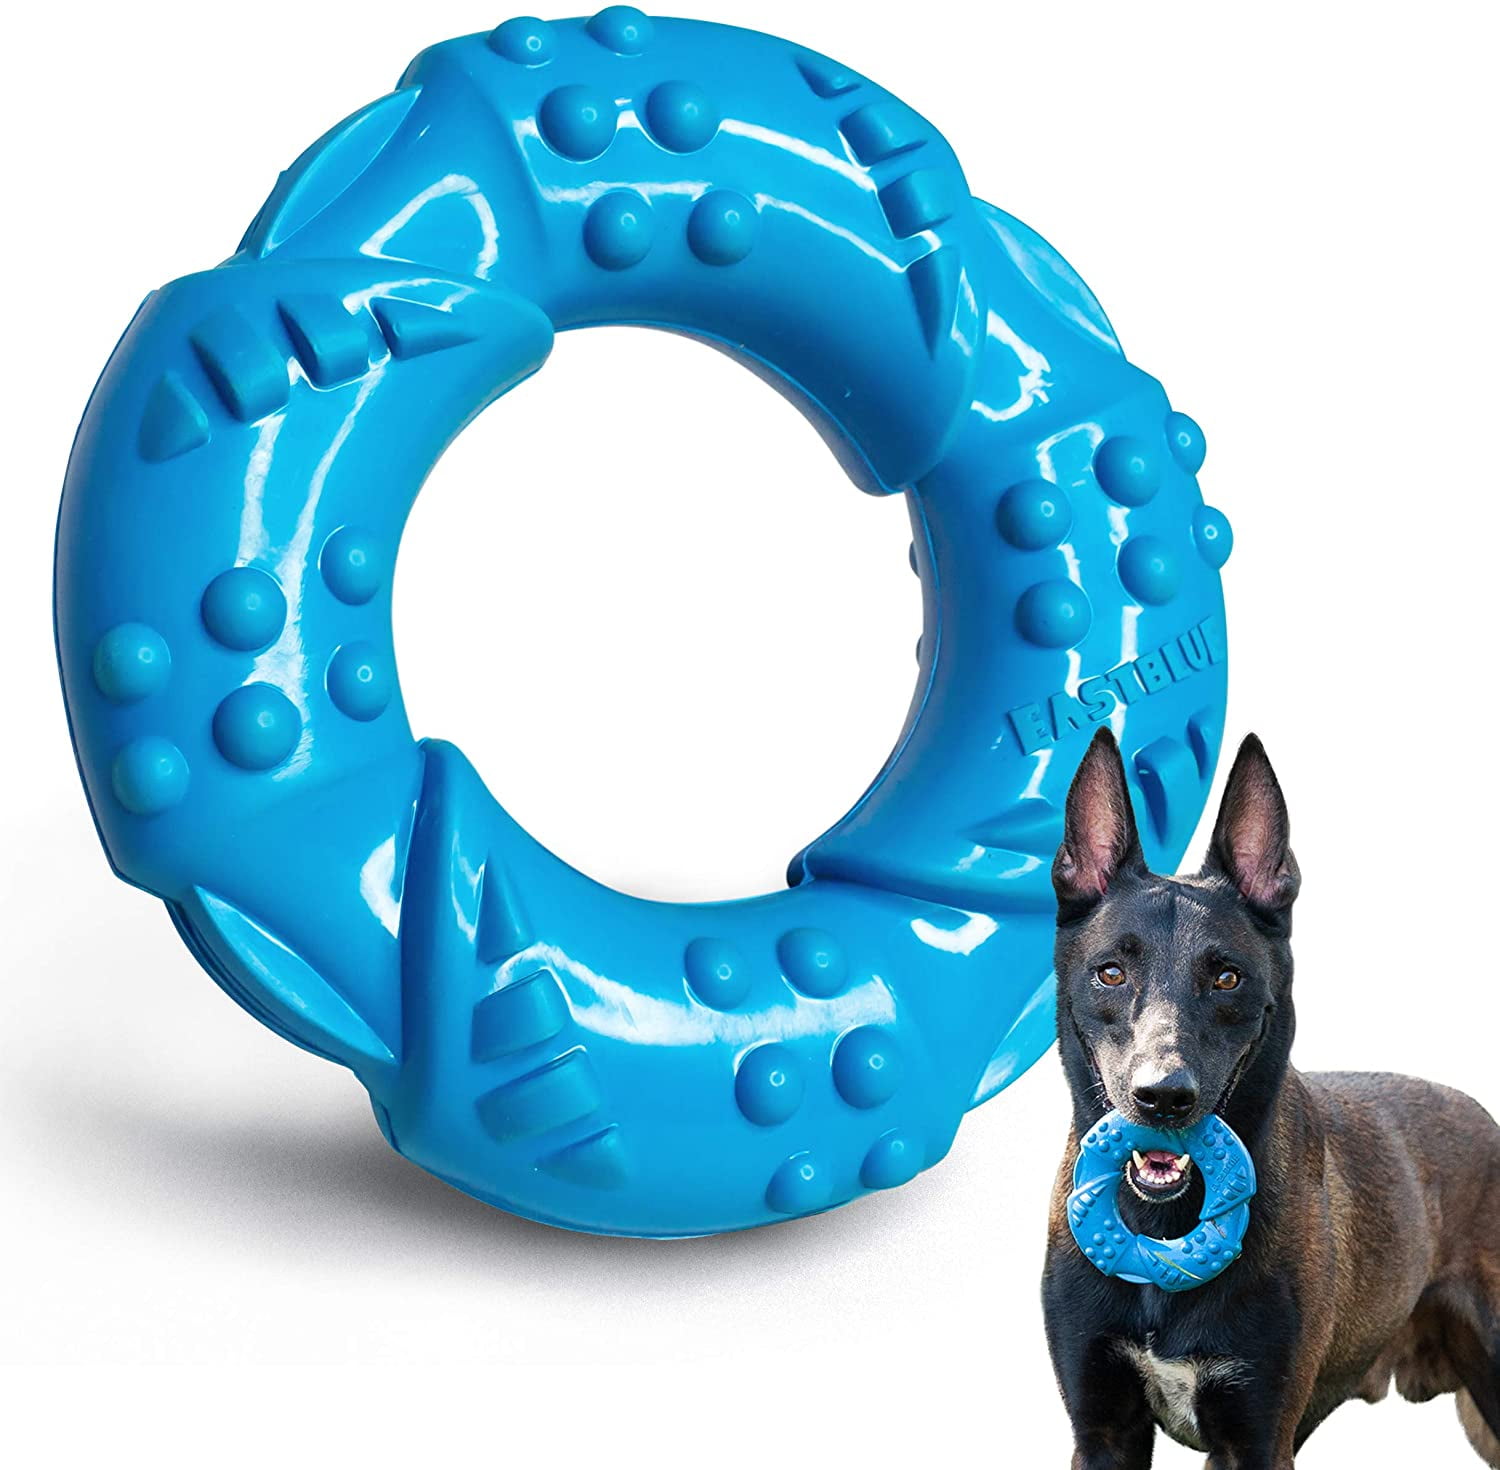 The 11 Best Durable Dog Toys